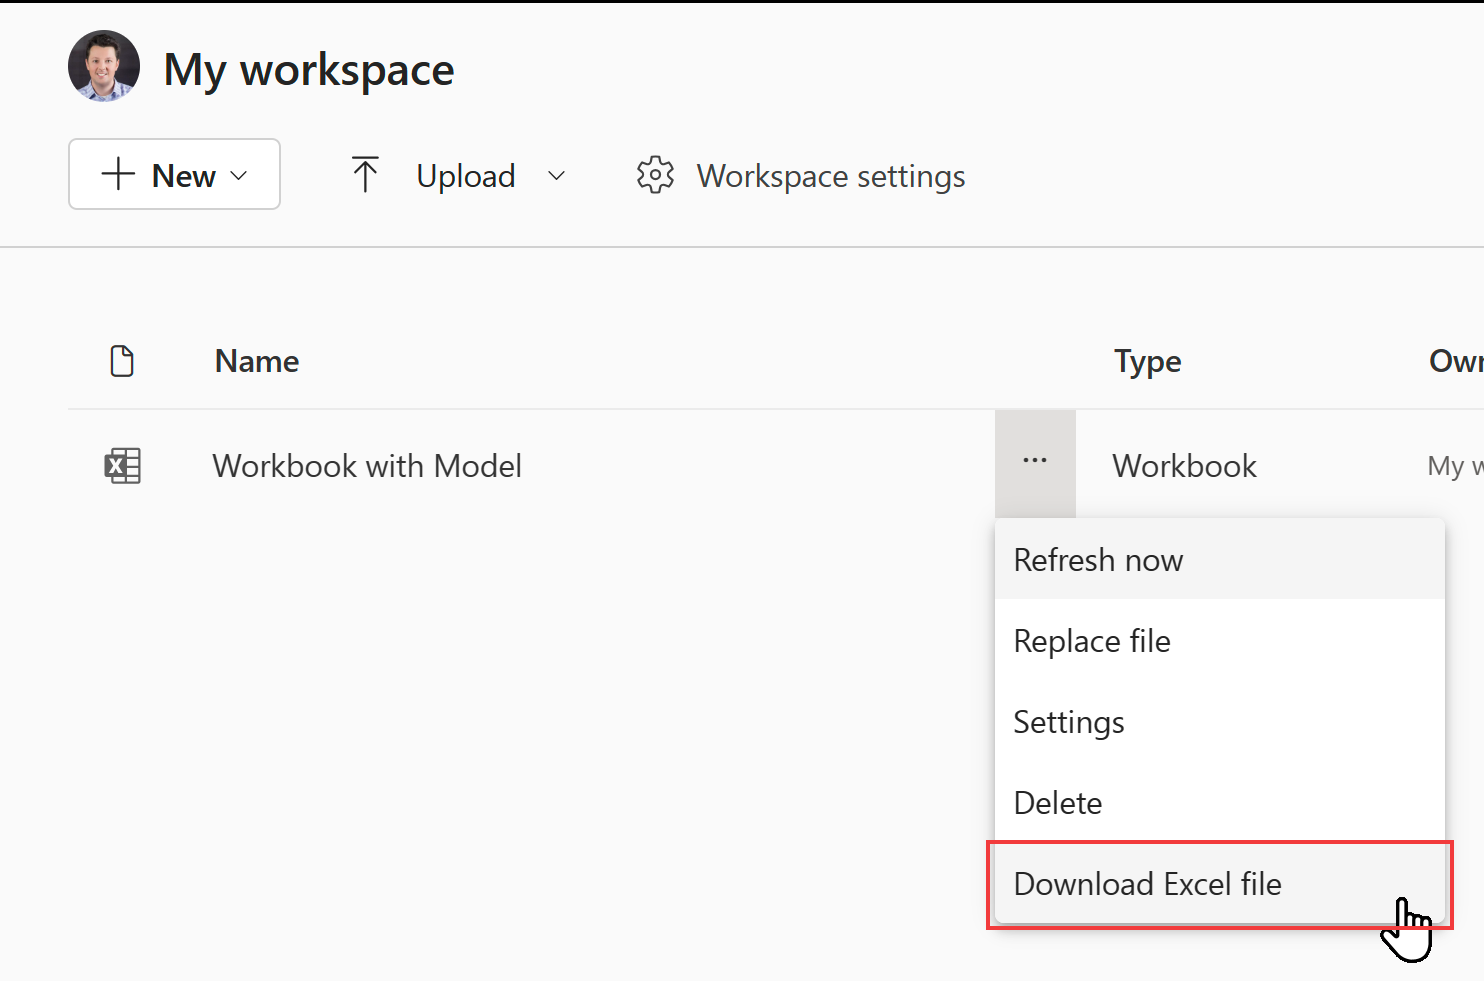 Screenshot that shows the download Excel file option for local workbooks.